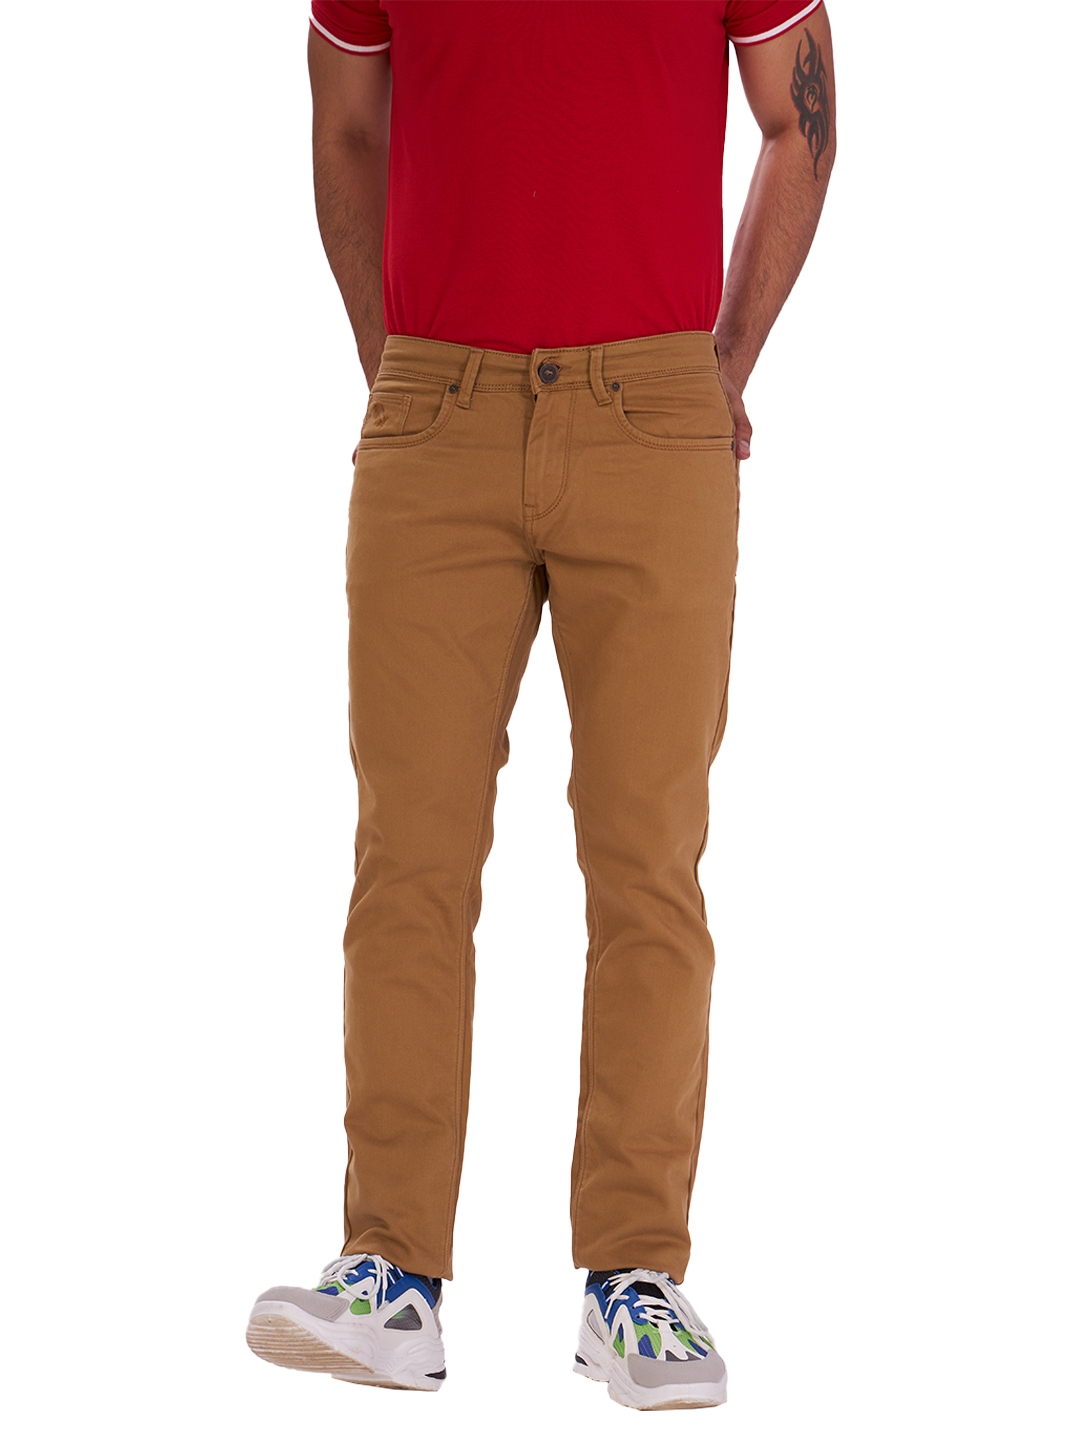 D'cot by Donear | D'cot by Donear Men's Brown Cotton Jeans